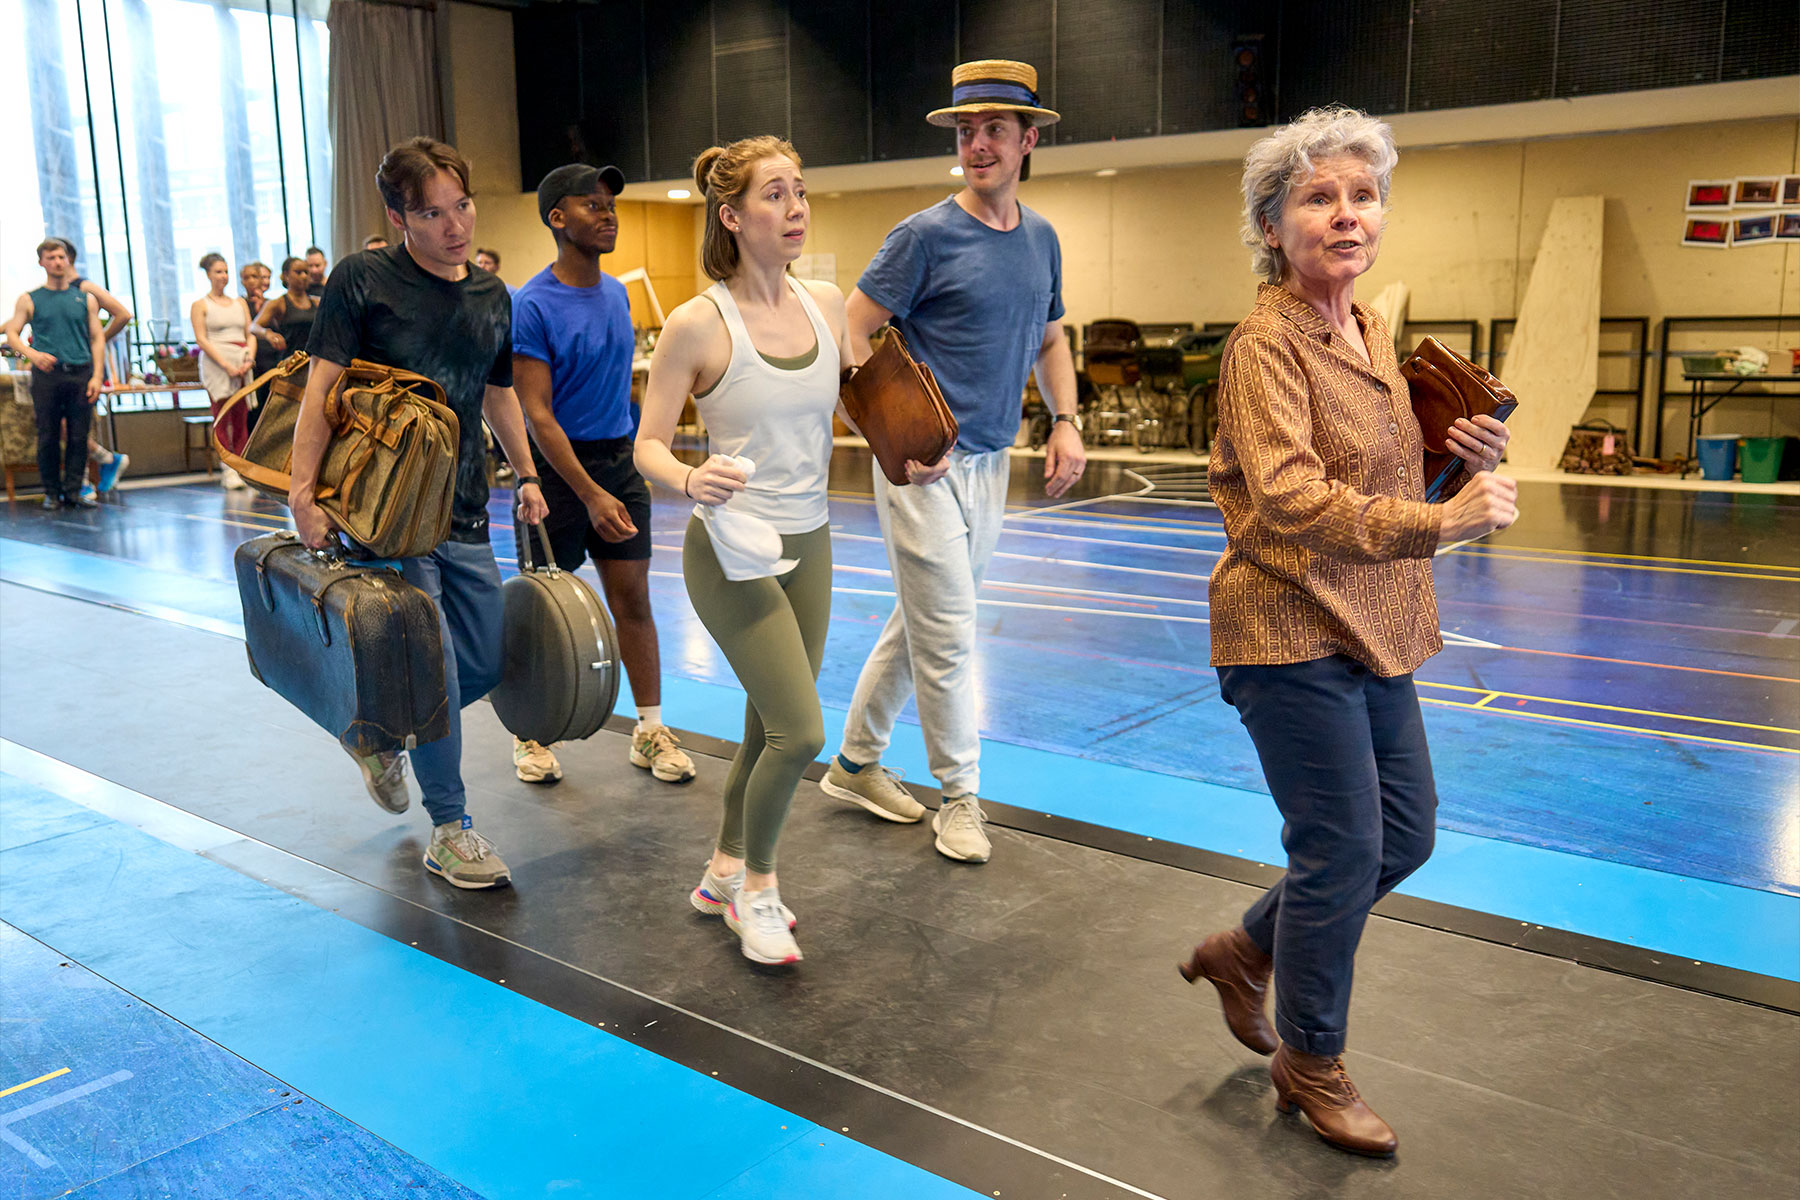 Michael Lin, Tyrone Huntley, Emily Langham, Harry Hepple and Imelda Staunton in rehearsals for Hello, Dolly!